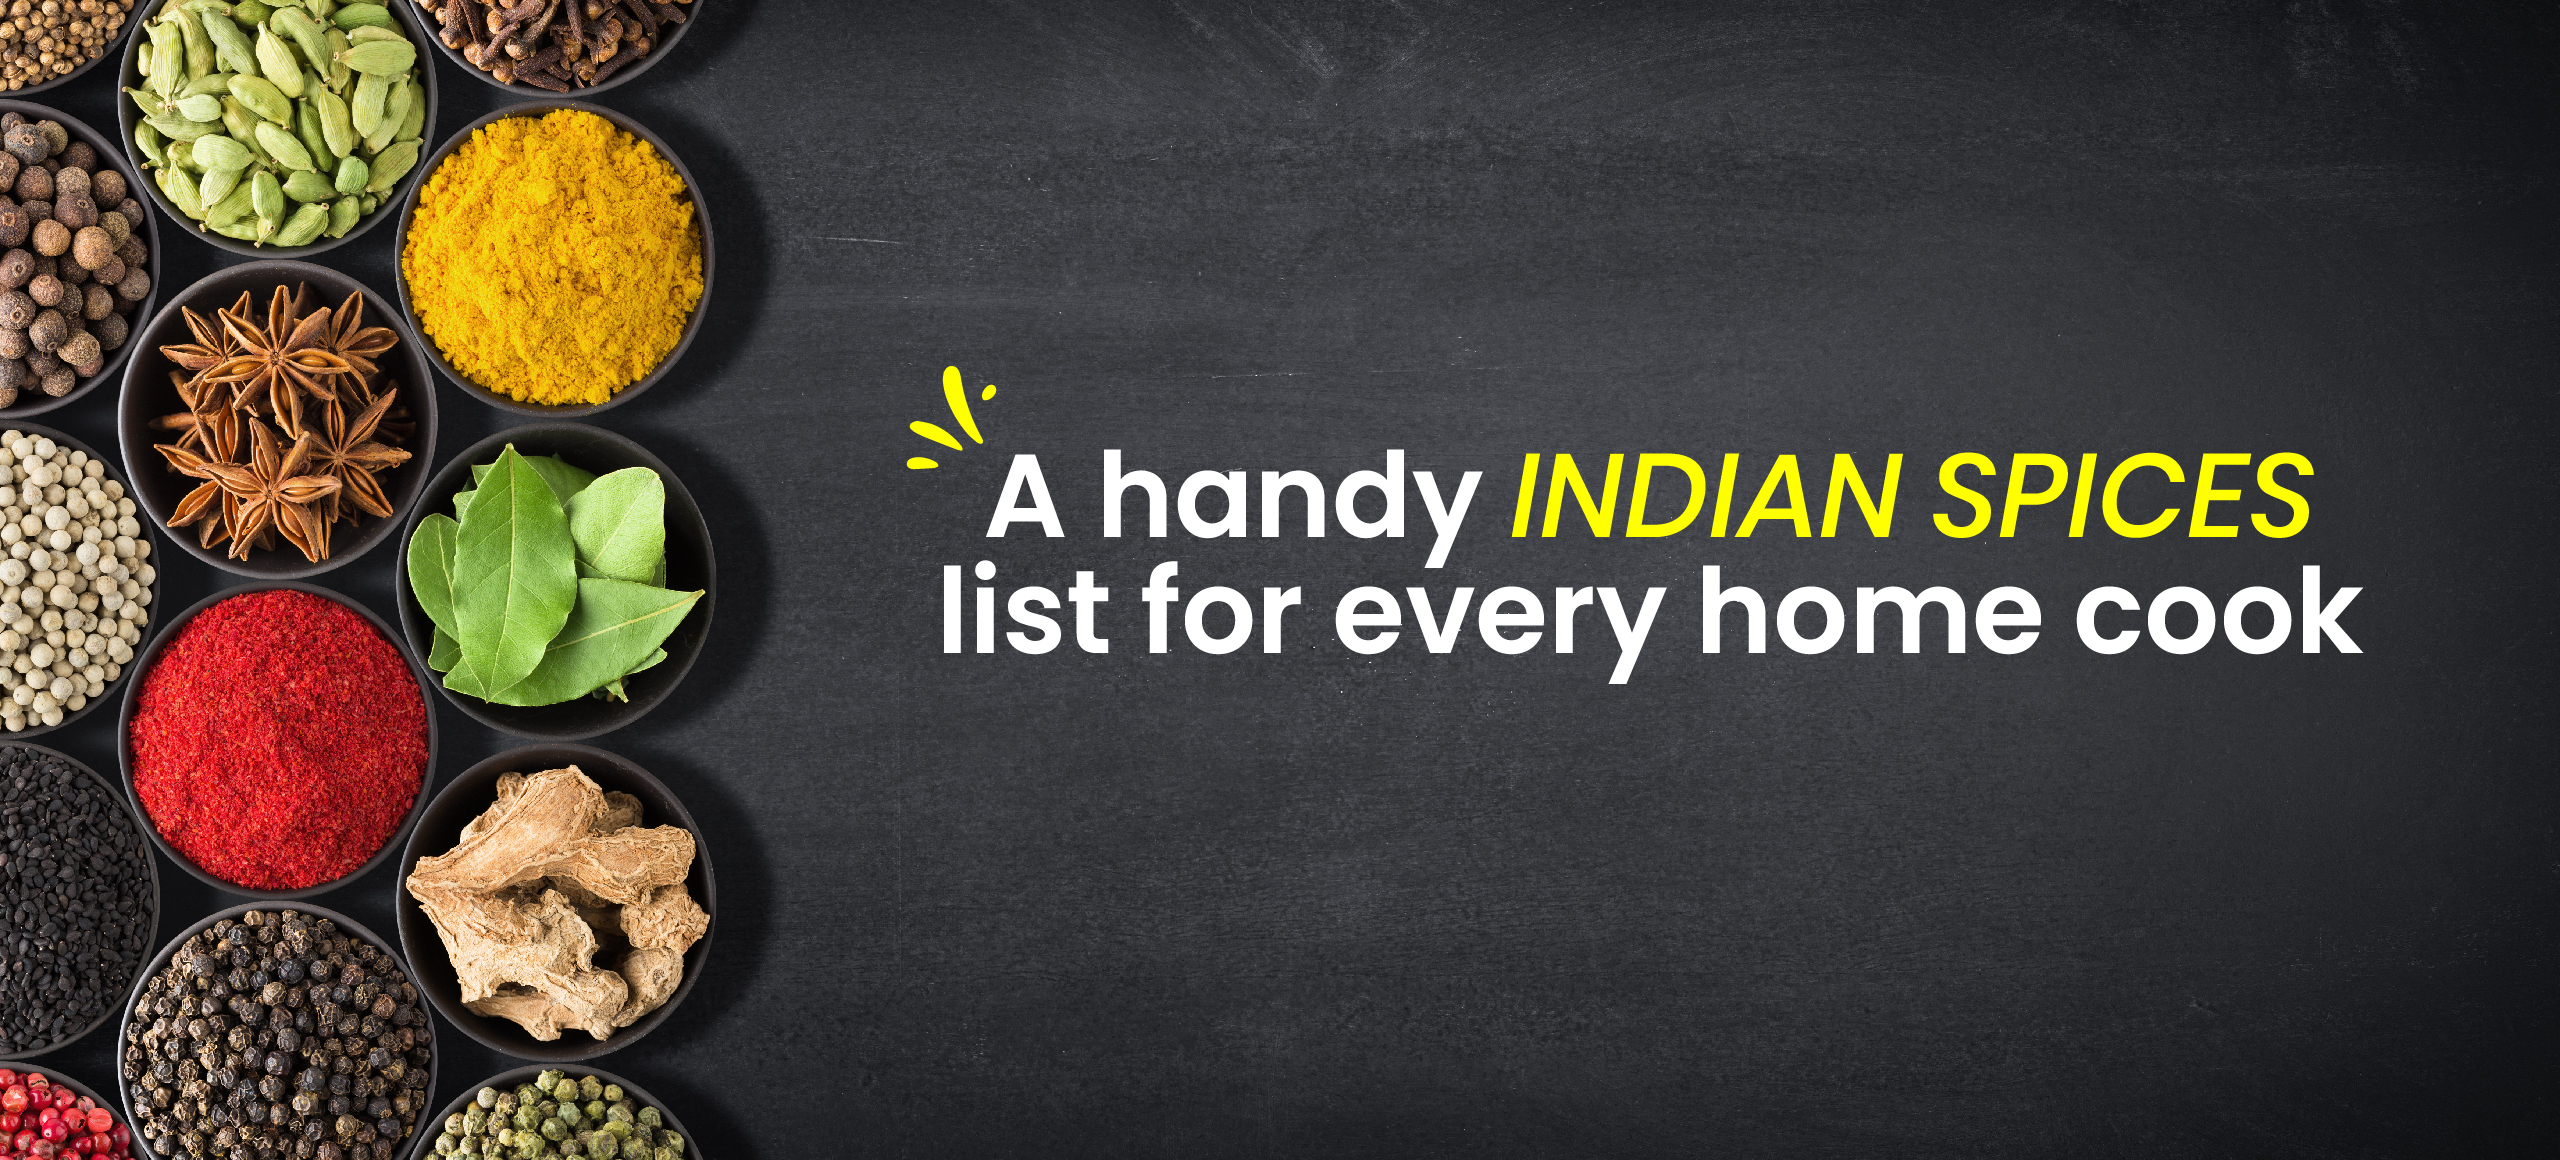 Indian Spices list